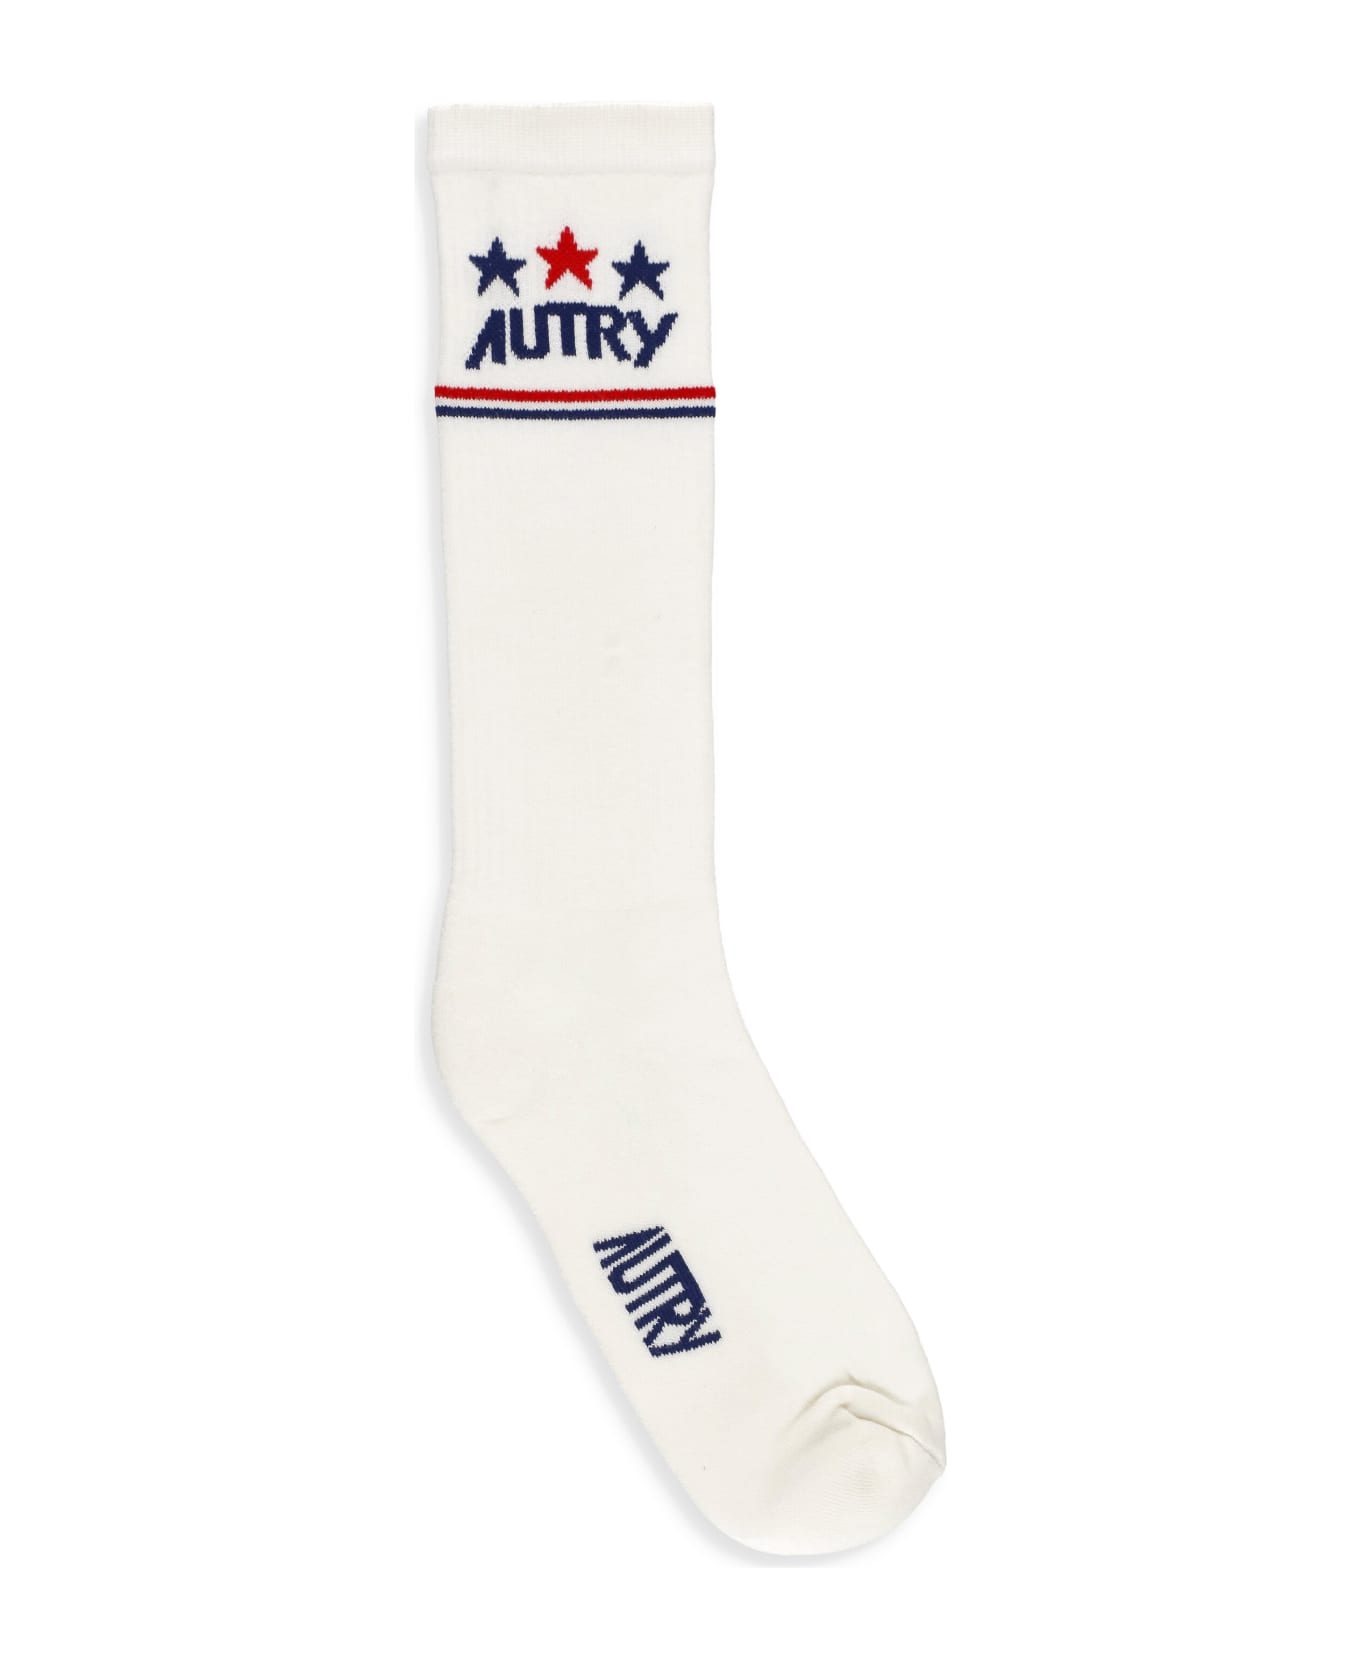 Autry Terry Socks - White 靴下